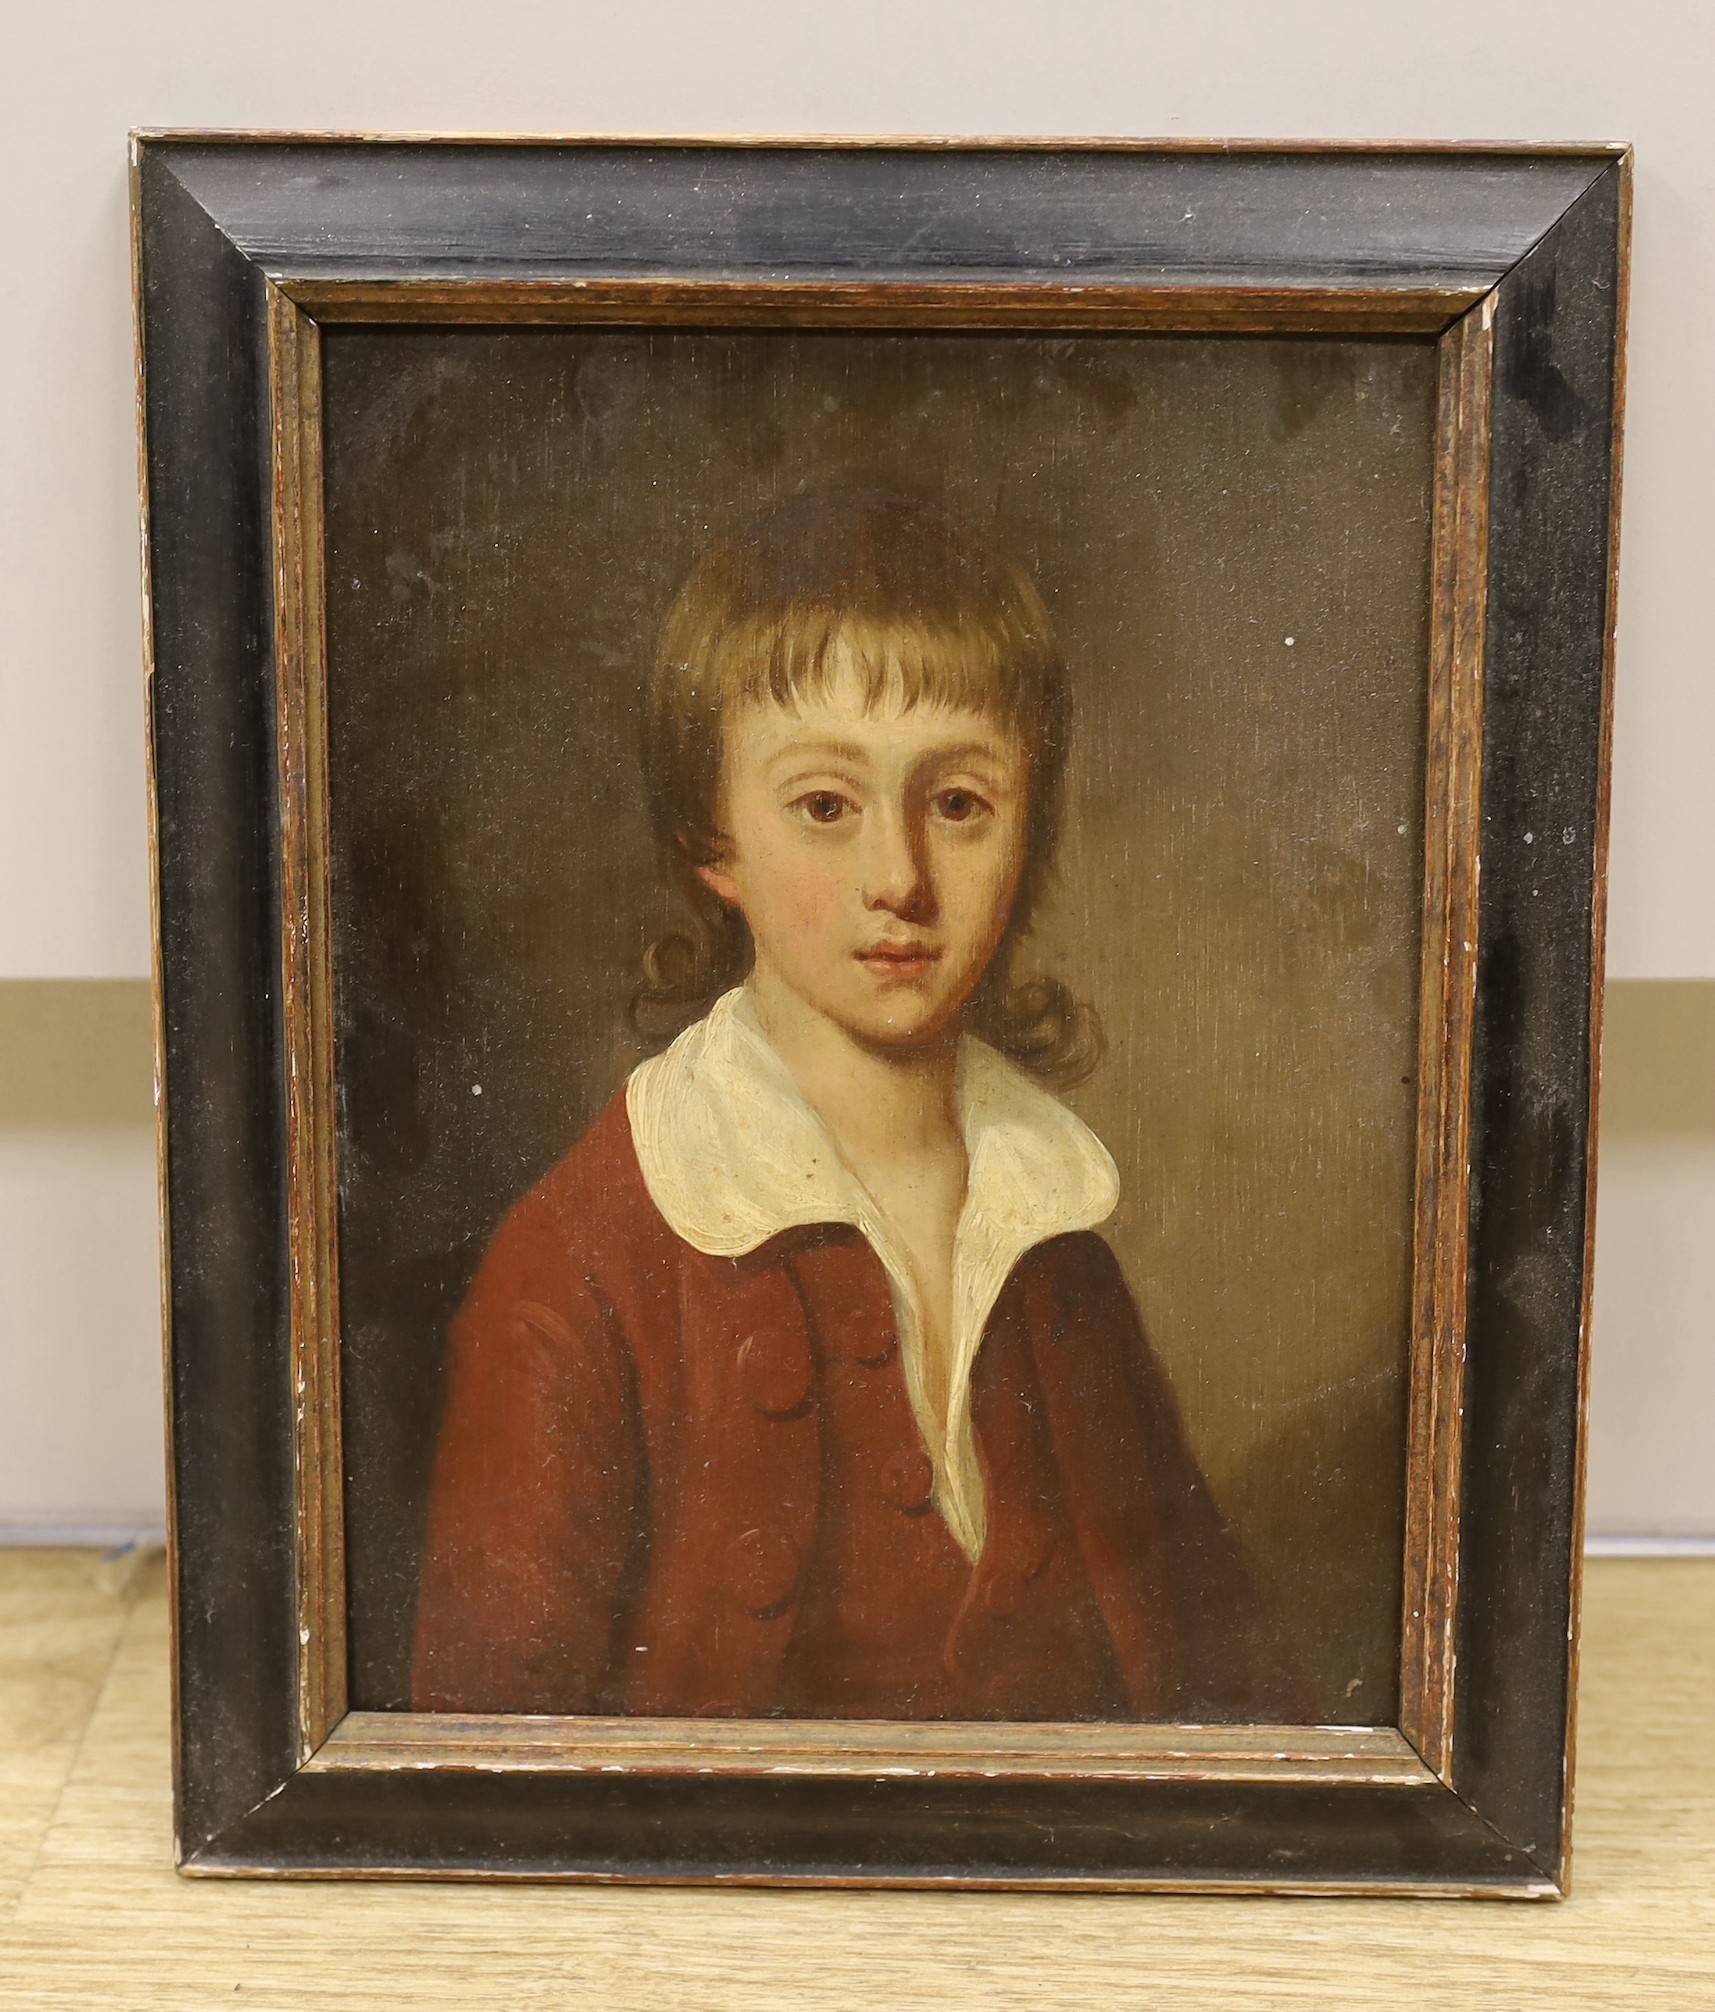 English School c.1800, oil on wooden panel, Portrait of a youth wearing a brown coat, 25 x 19cm